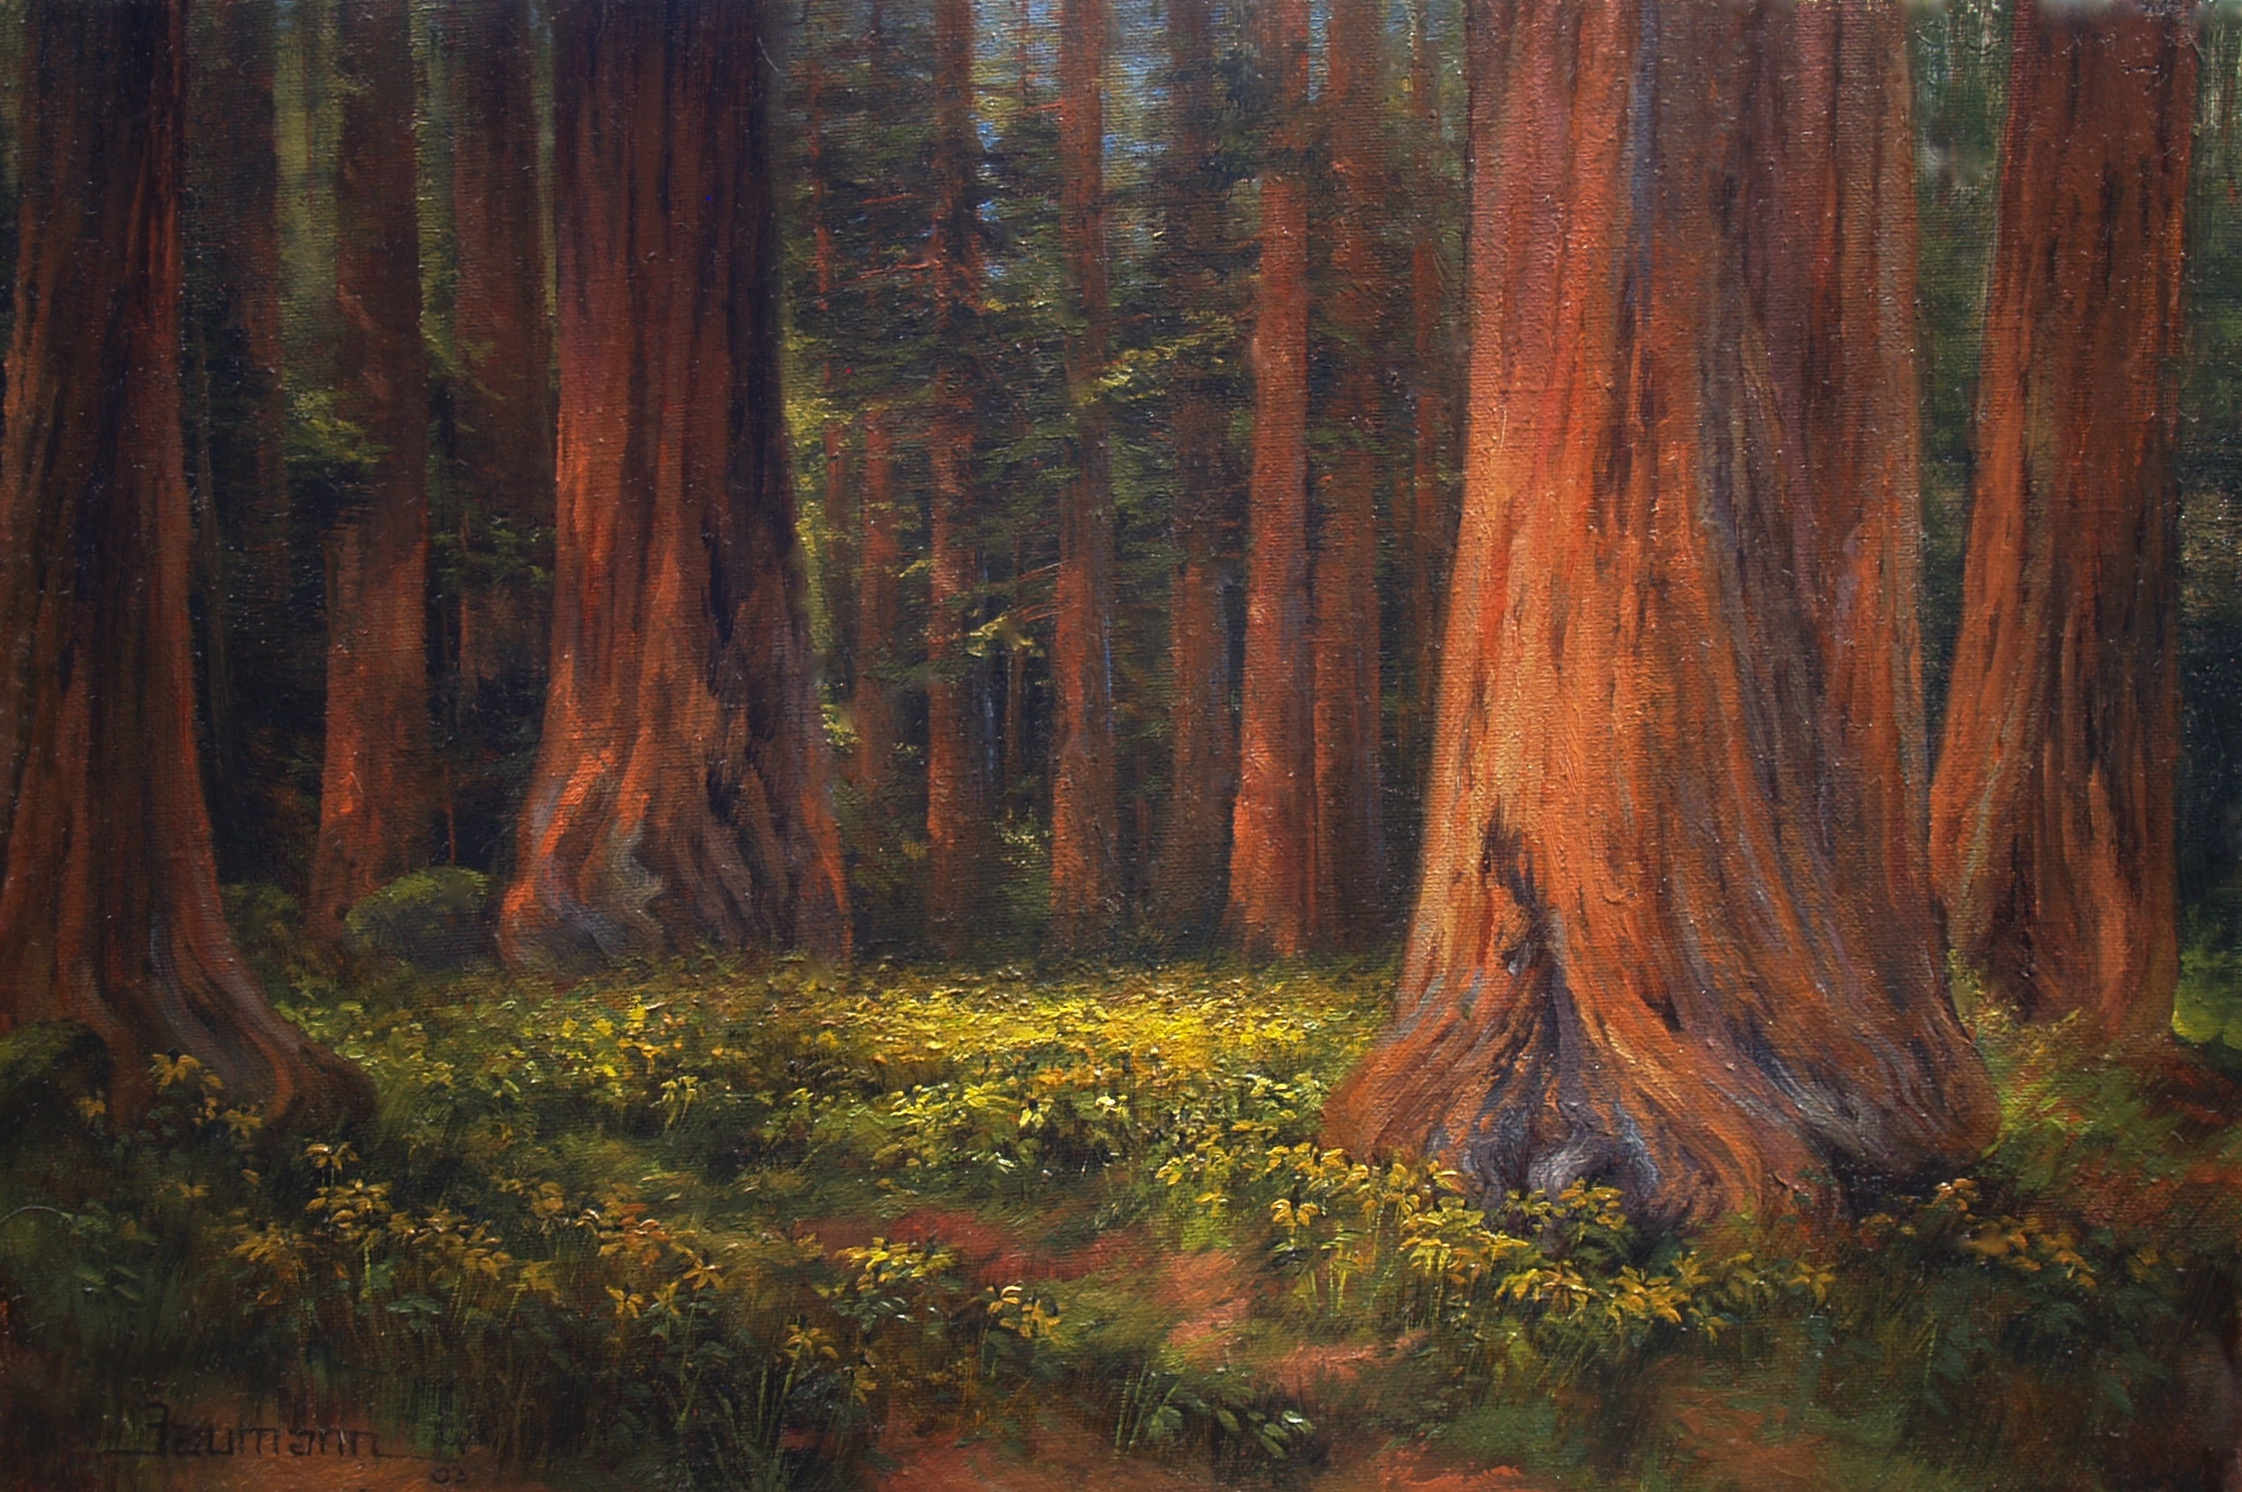 This painting of Giant Sequoia Trees with yellow flowers on the ground was painted by Stefan Baumann and titled Among the Giants.